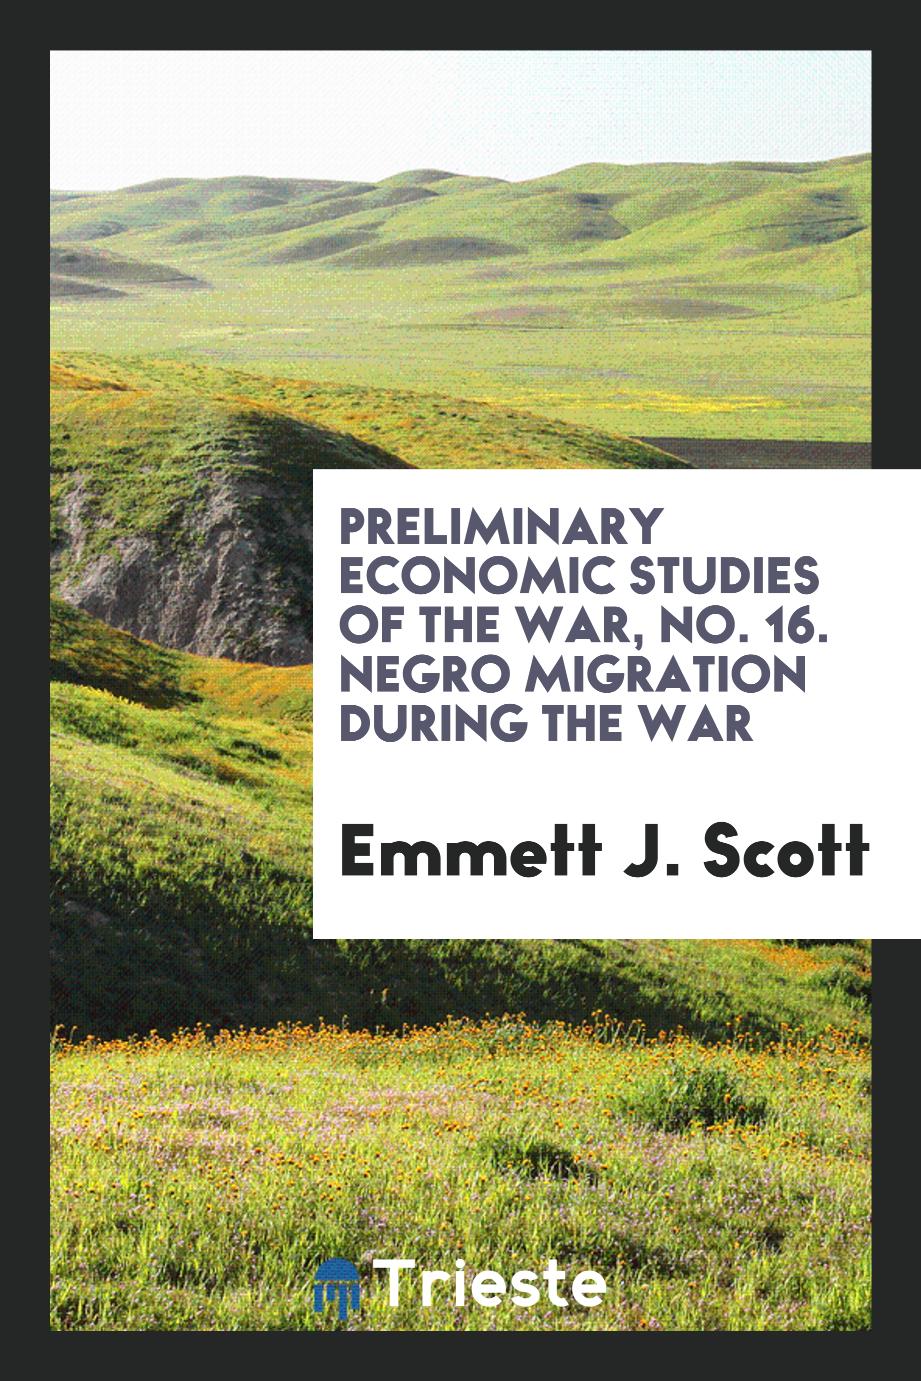 Preliminary economic studies of the war, No. 16. Negro migration during the war